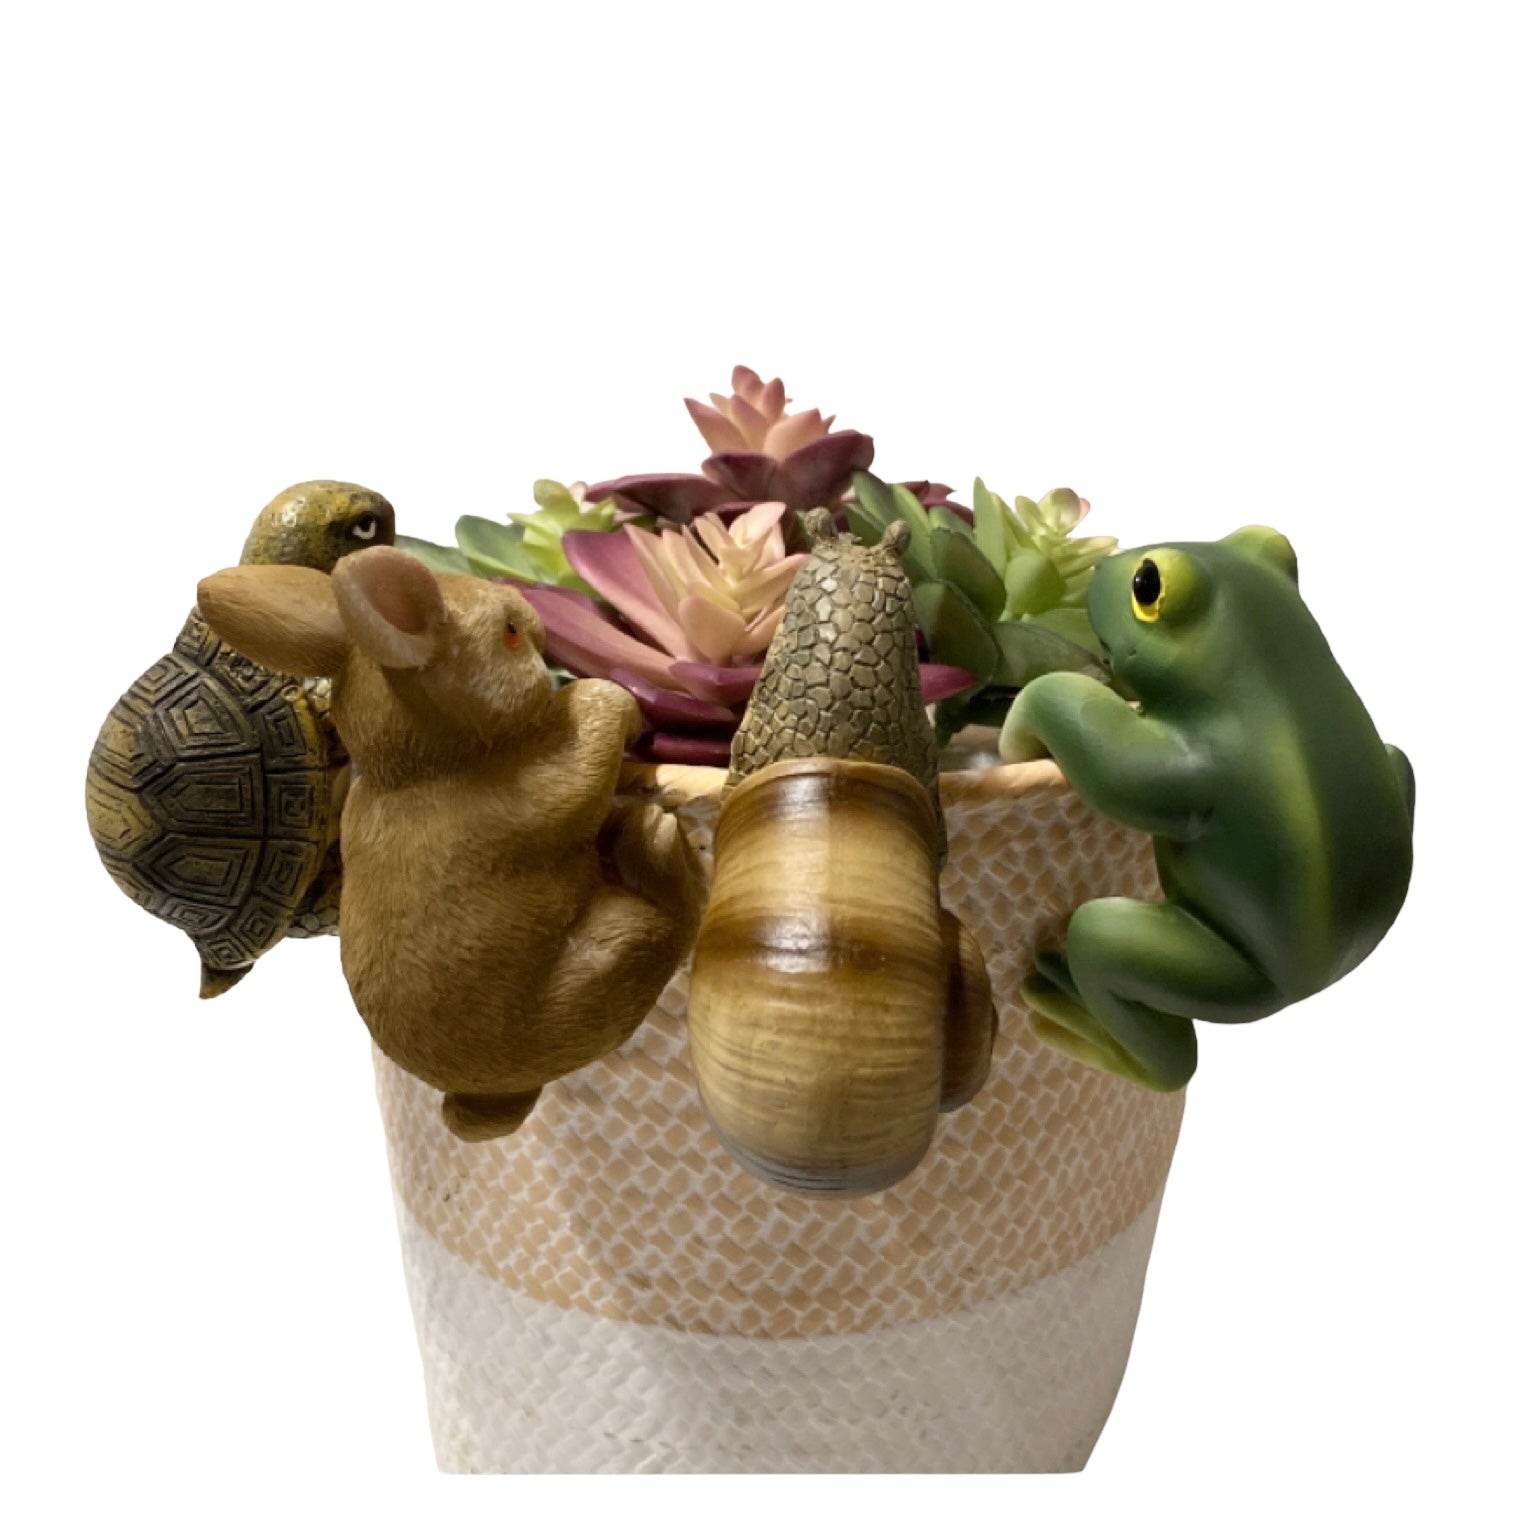 Snail Frog Rabbit Turtle Pot Planter Sitter Hanger Set of 4 - The Renmy Store Homewares & Gifts 